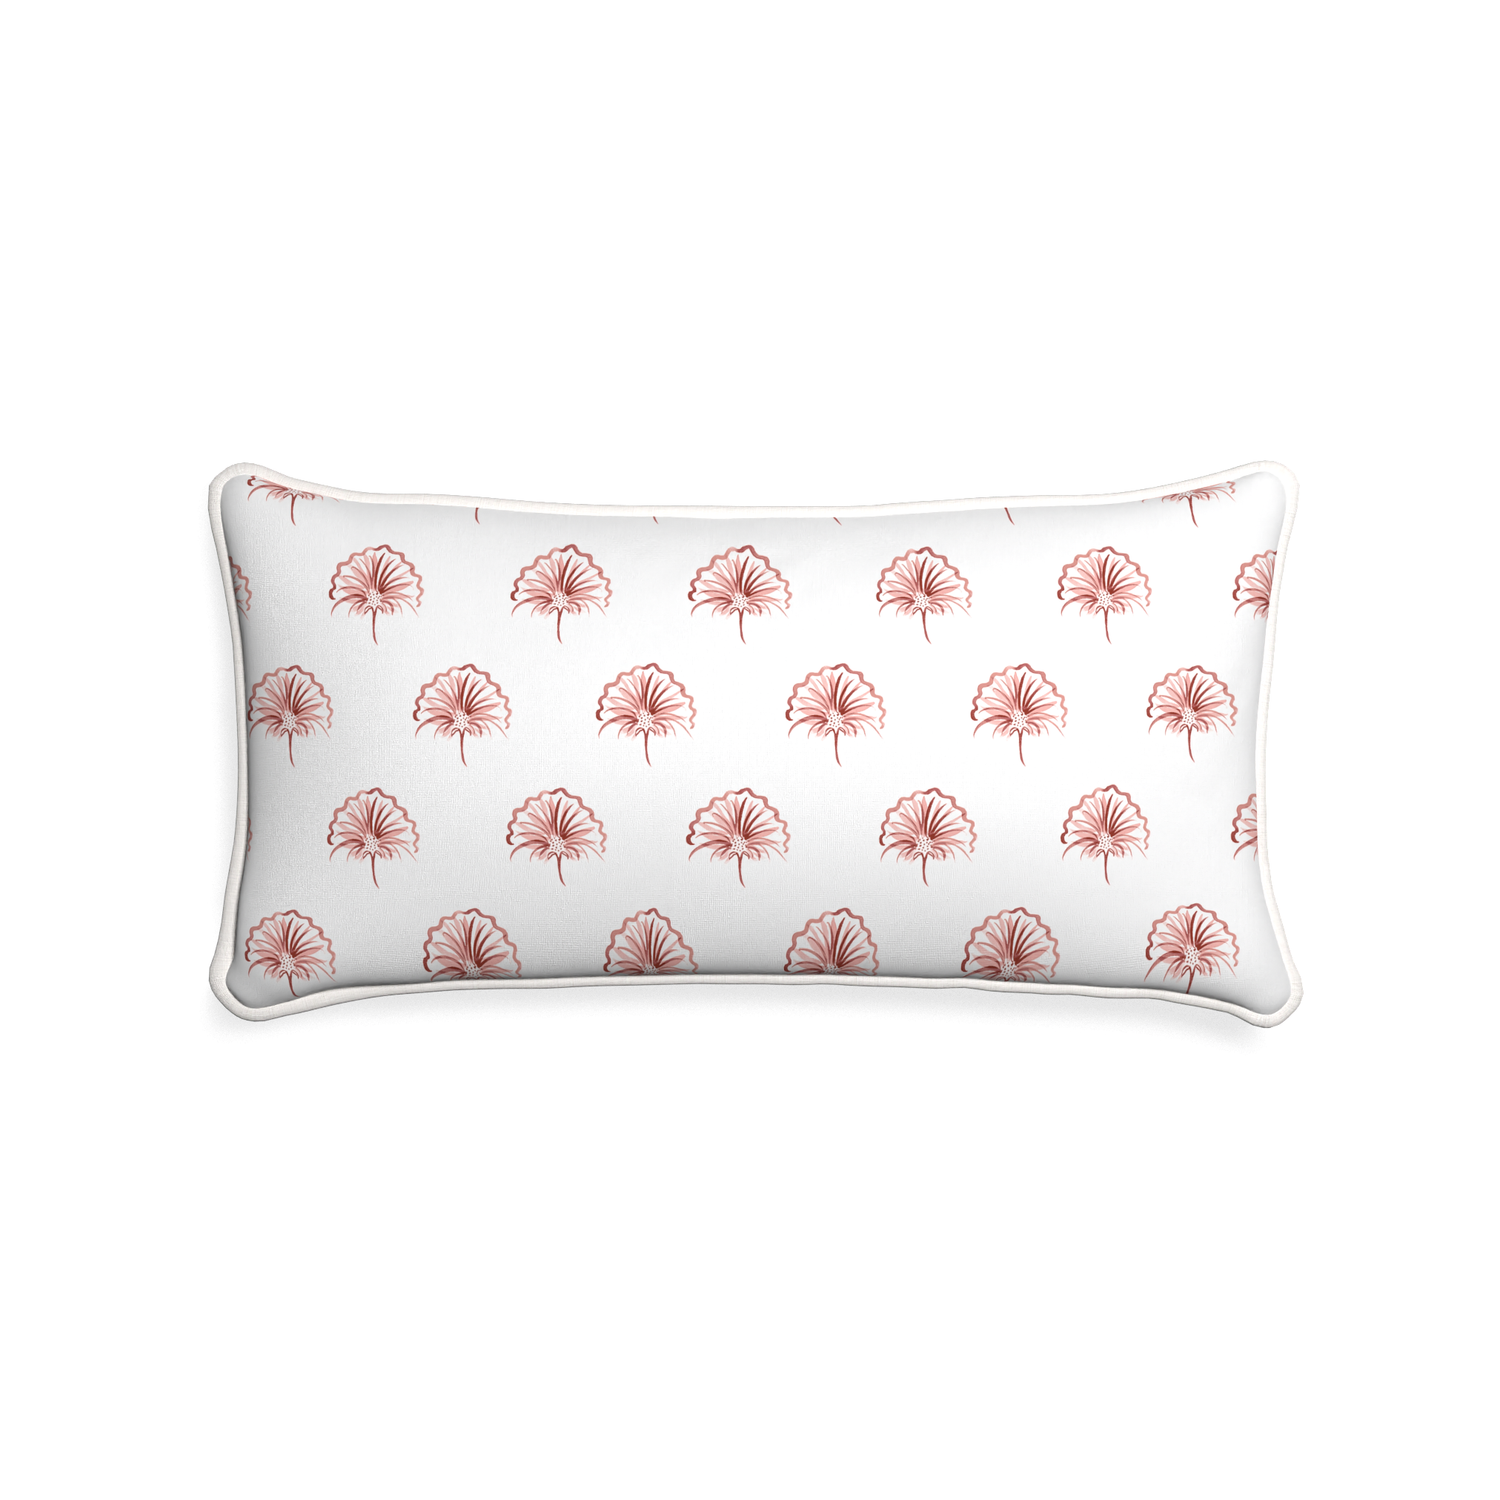 Midi-lumbar penelope rose custom floral pinkpillow with snow piping on white background